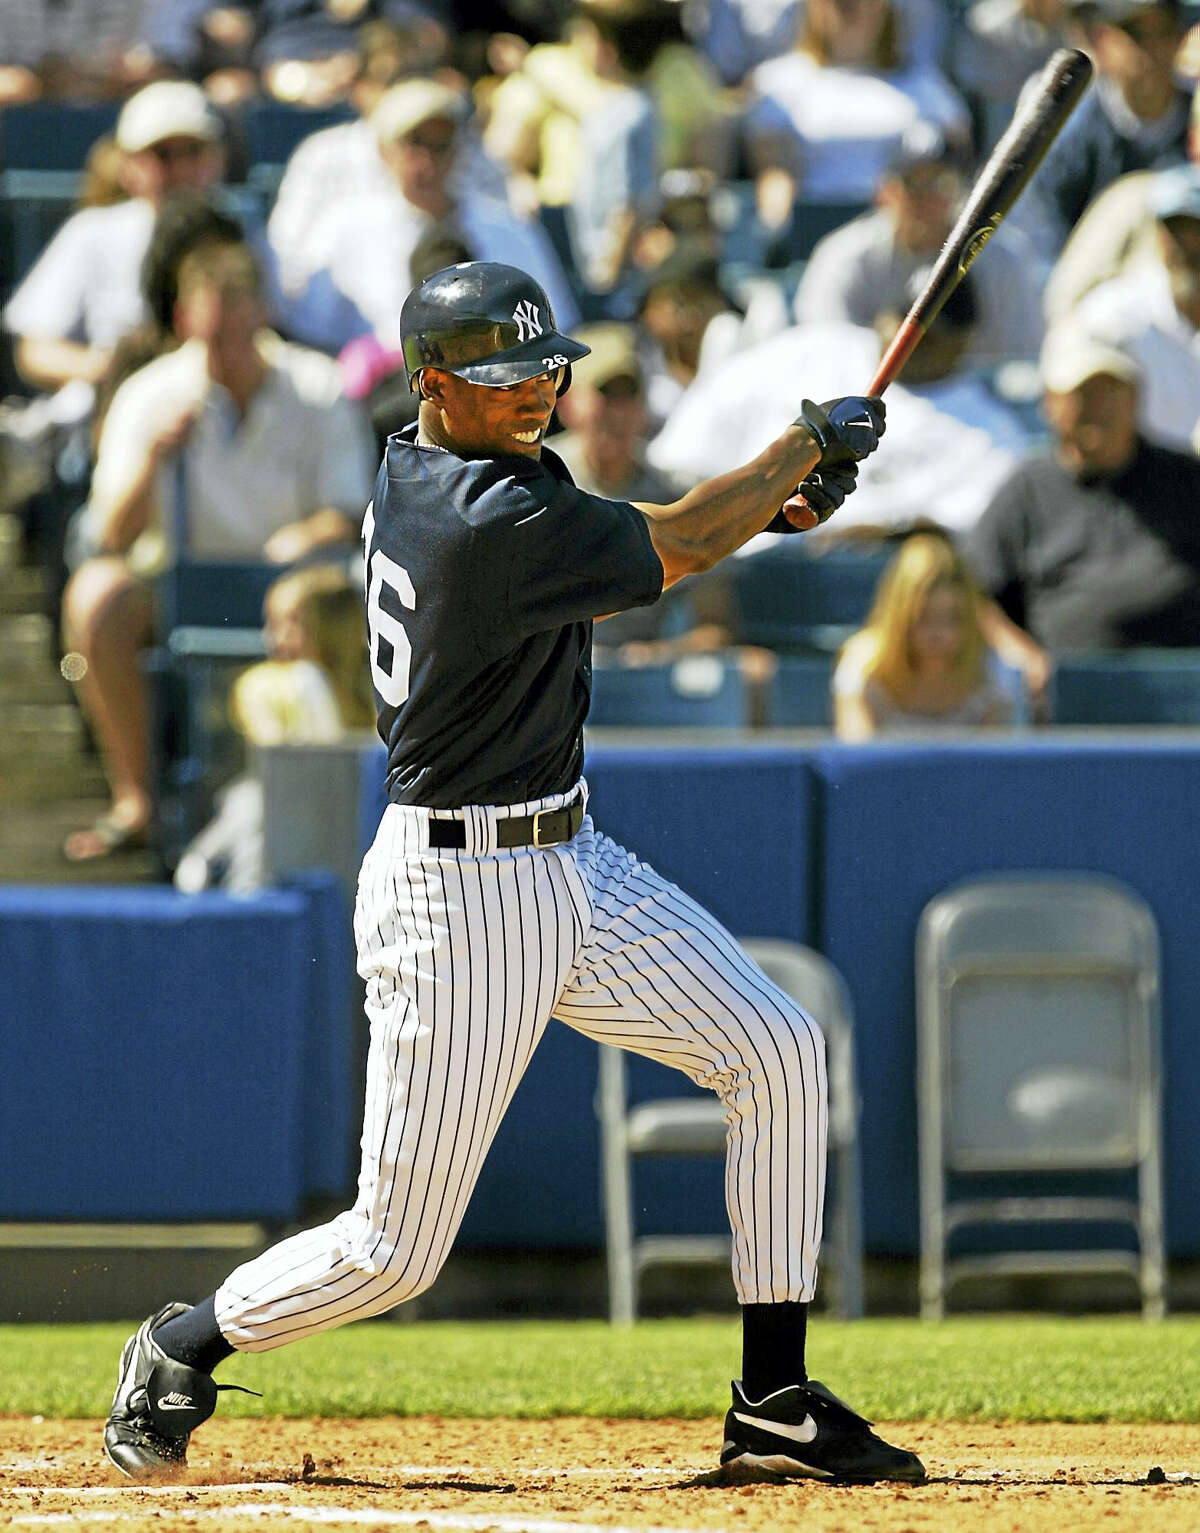 New York Yankees’ Doug Glanville swings through during one of his four at bats against the Philadelphia Phillies in 2005 at Legends Field in Tampa, Fla. Connecticut Gov. Dannel P. Malloy appointed Glanville to serve on the Connecticut commission responsible for enforcing professional standards for certifying police officers.